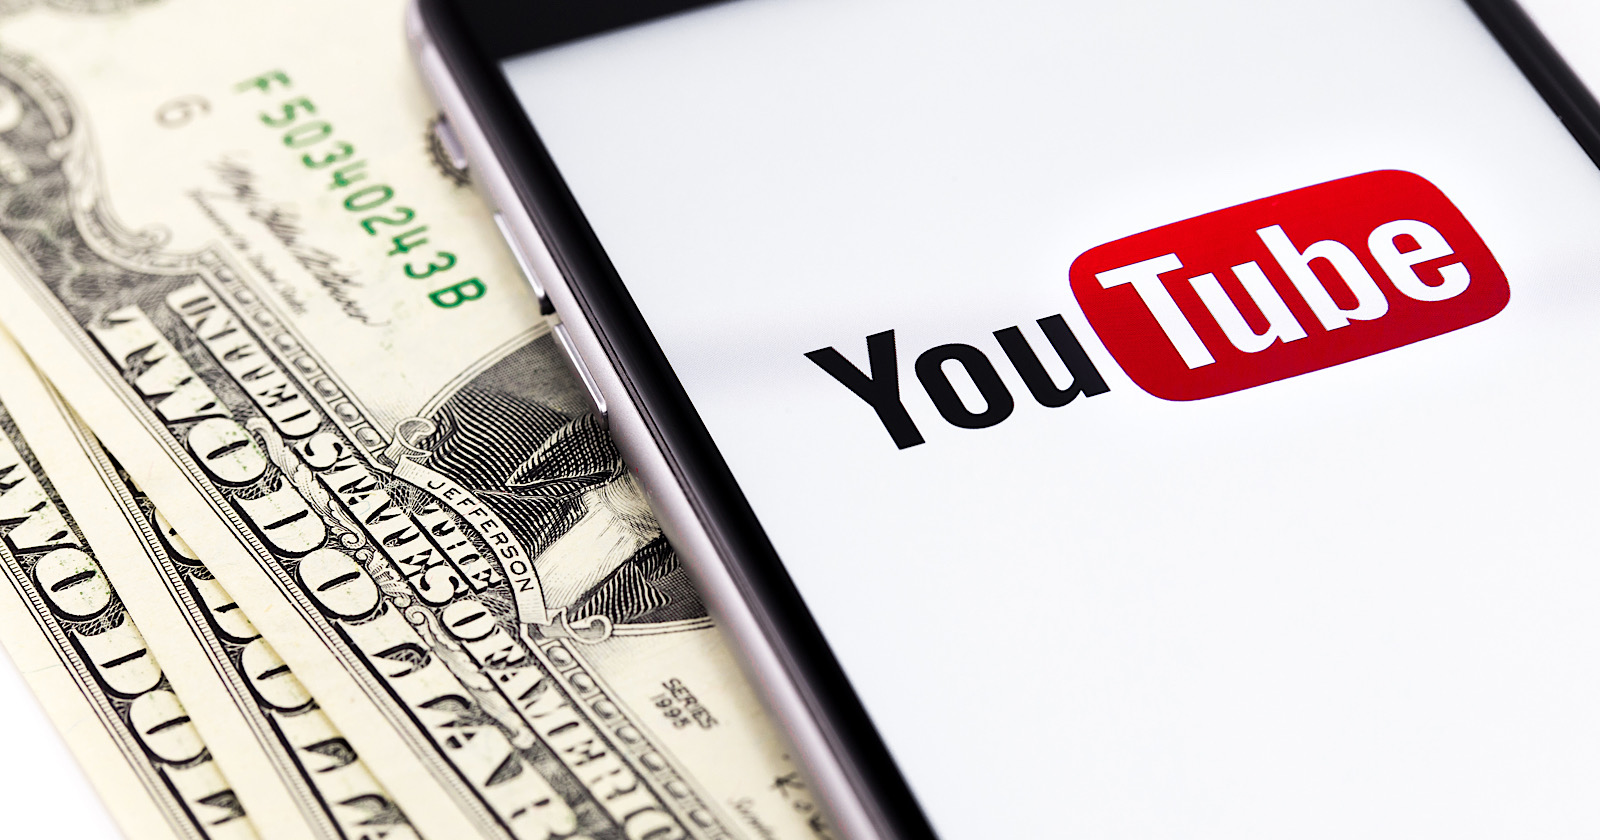 youtube changes rolling out january 2020 may impact creator revenue via mattgsouthern